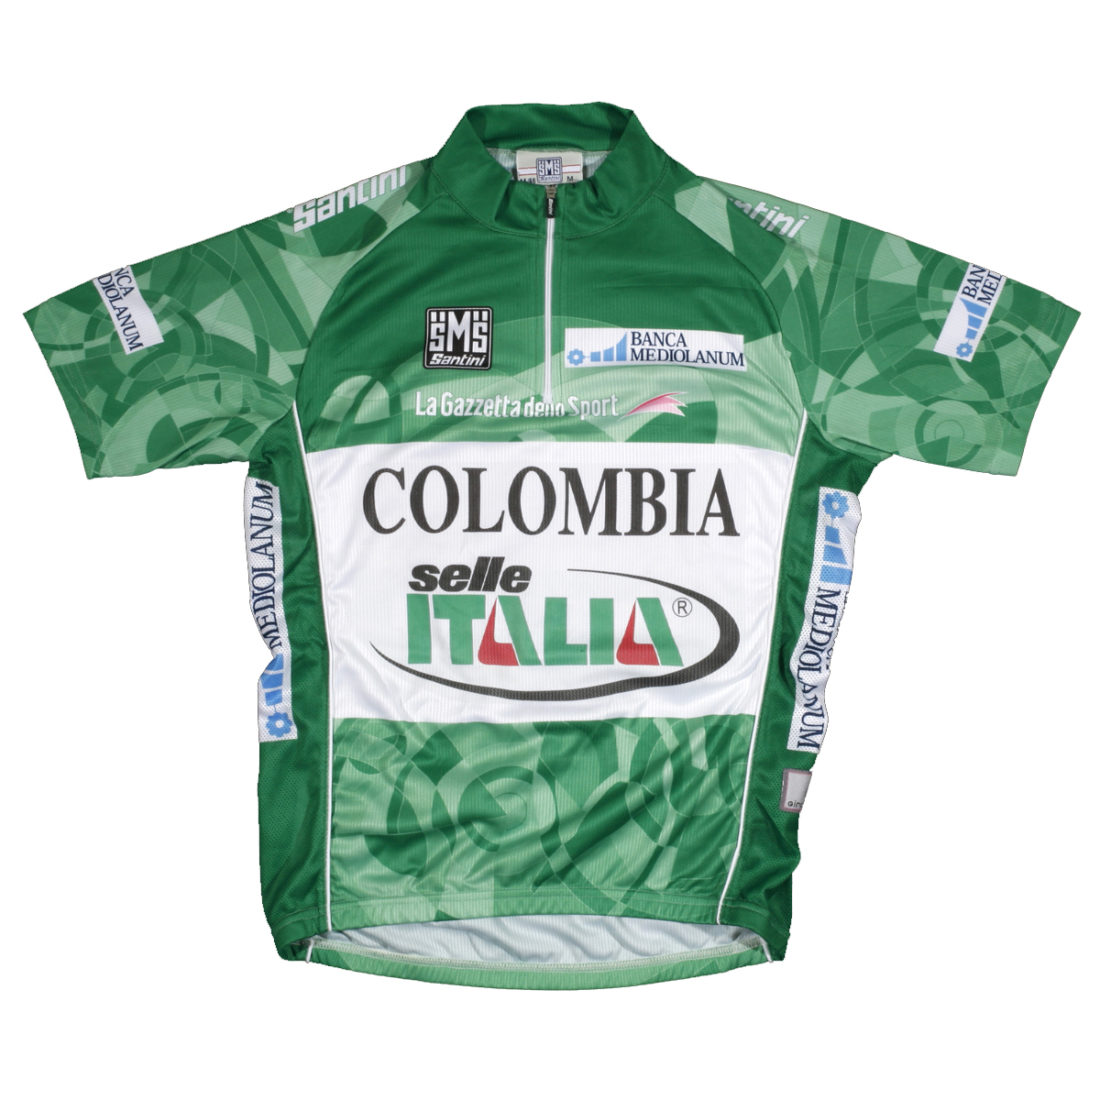 Fredy Gonzalez, Authentic Race Issue, 2003 Giro d'Italia Mountains  Classification Jersey - Horton Collection